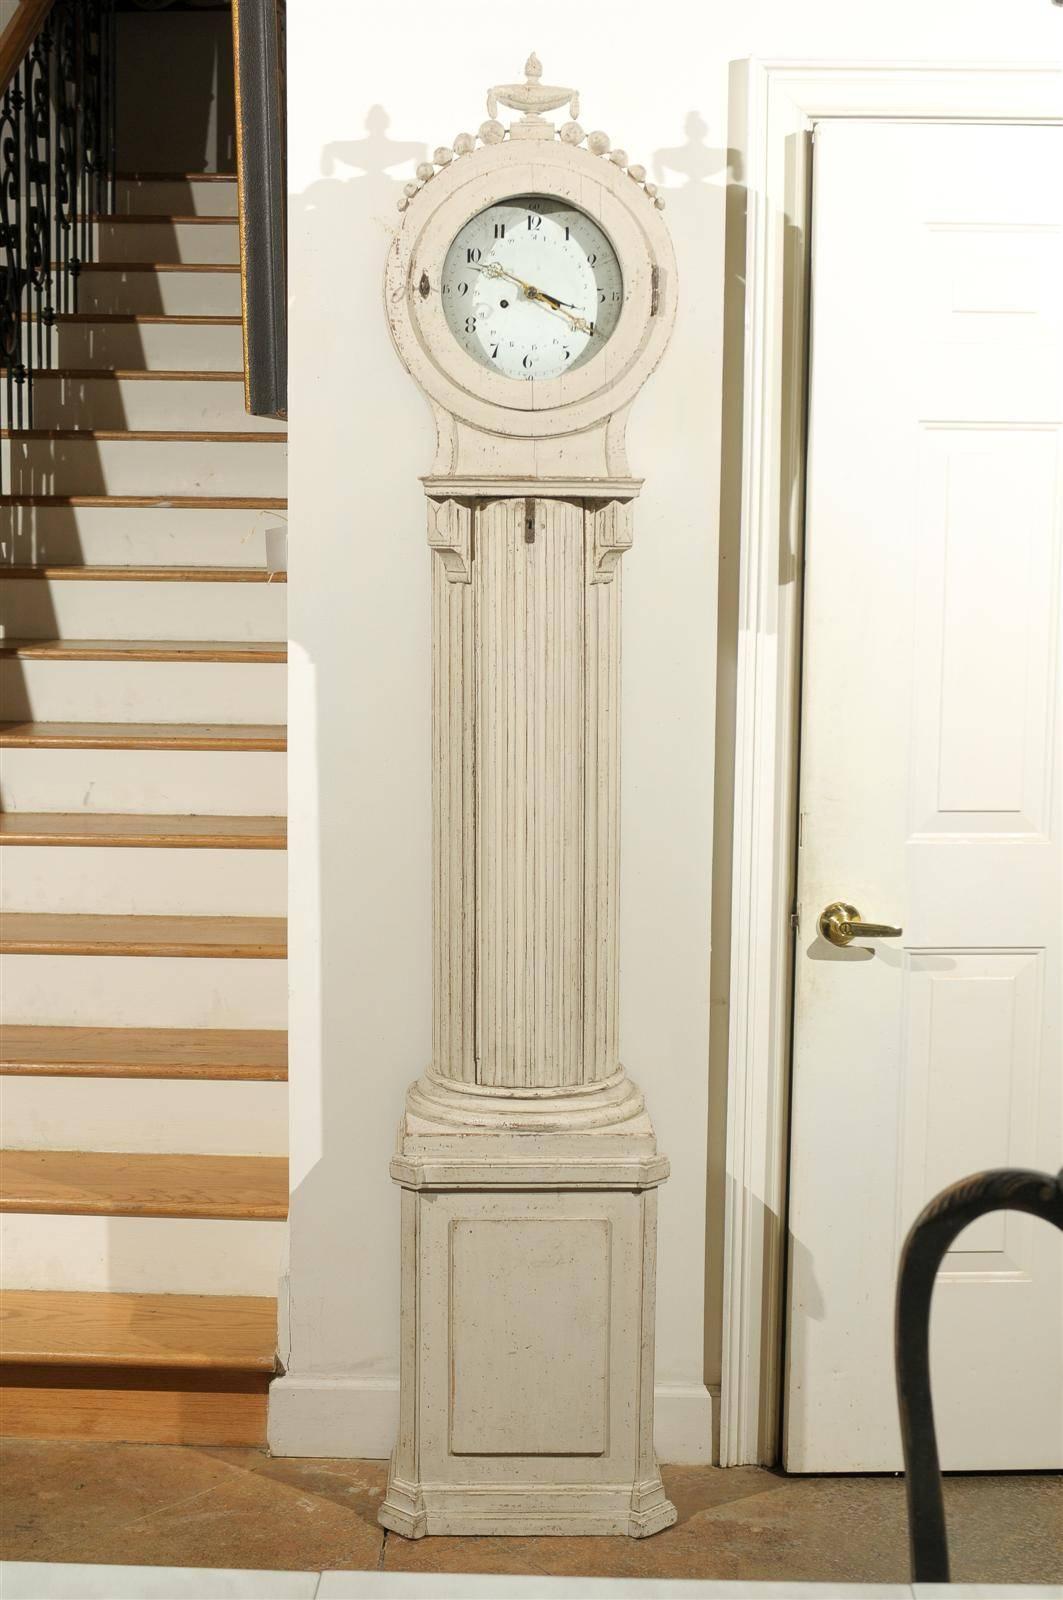 A Swedish painted tall case column clock from the mid 19th century, with carved crest, original movements and original paint. This exquisite Swedish clock features a delicately carved crest, adorned with a fire urn, accented with a swag and